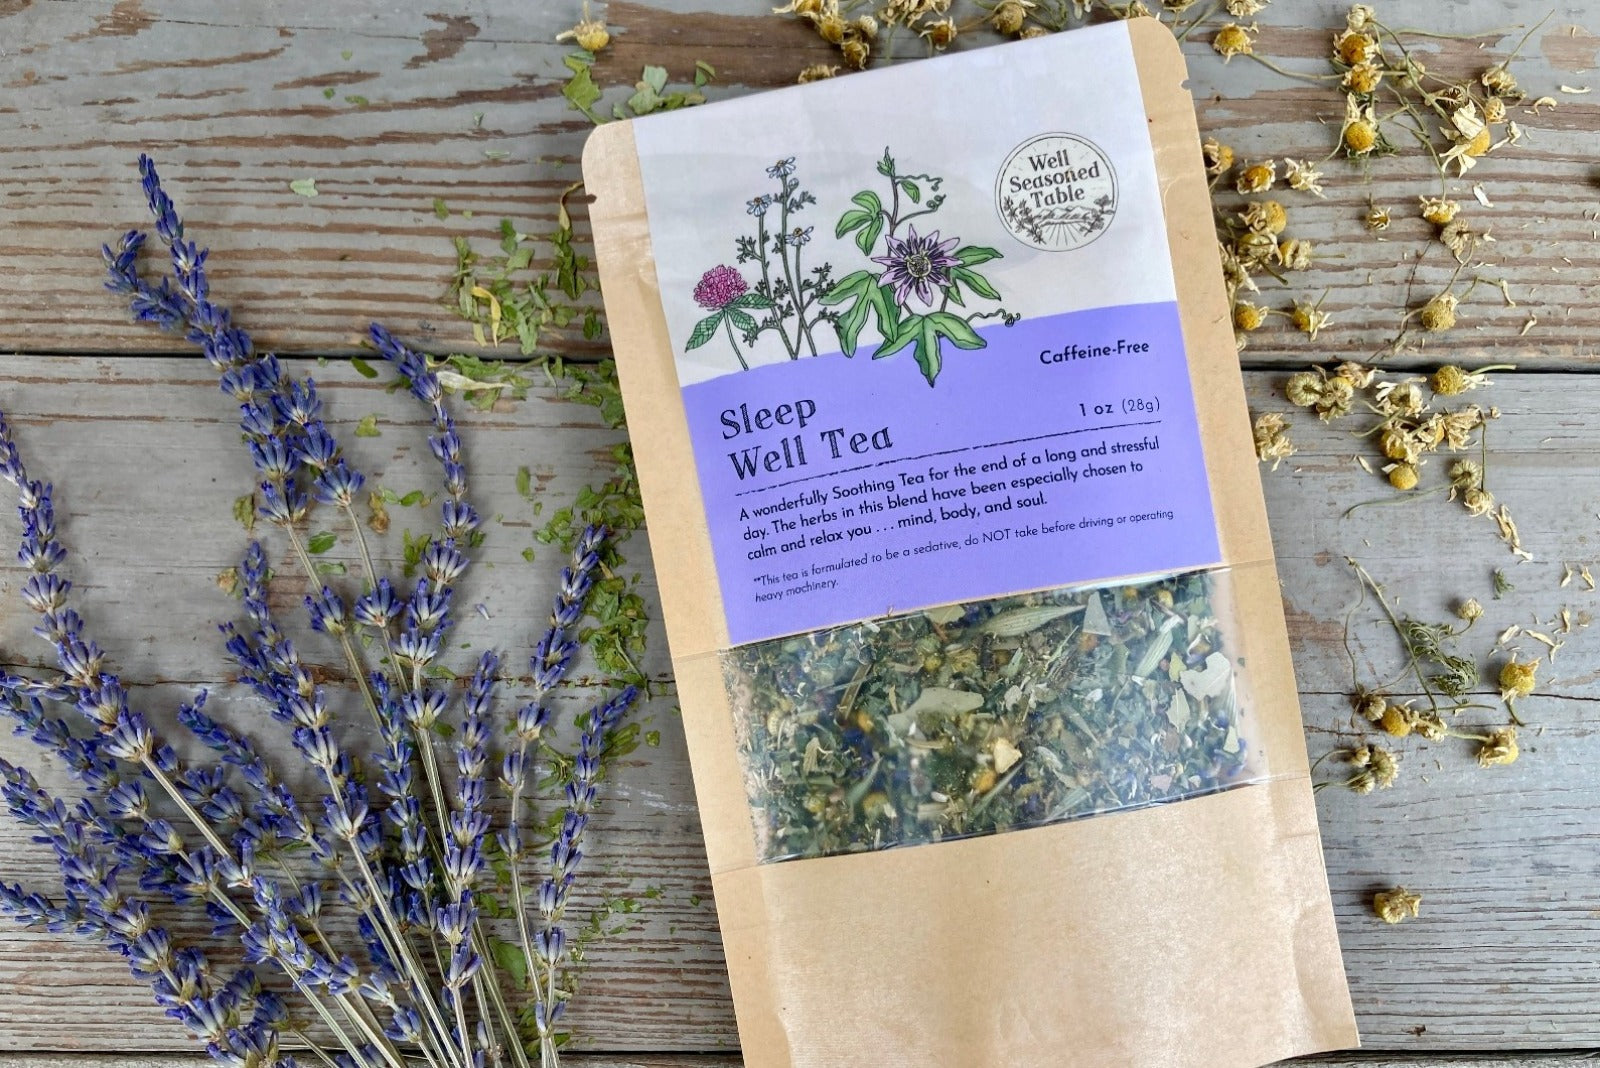  A packet of Sleep Well Tea from Well Seasoned Table on a wooden background with dried lavender and chamomile flowers around it.